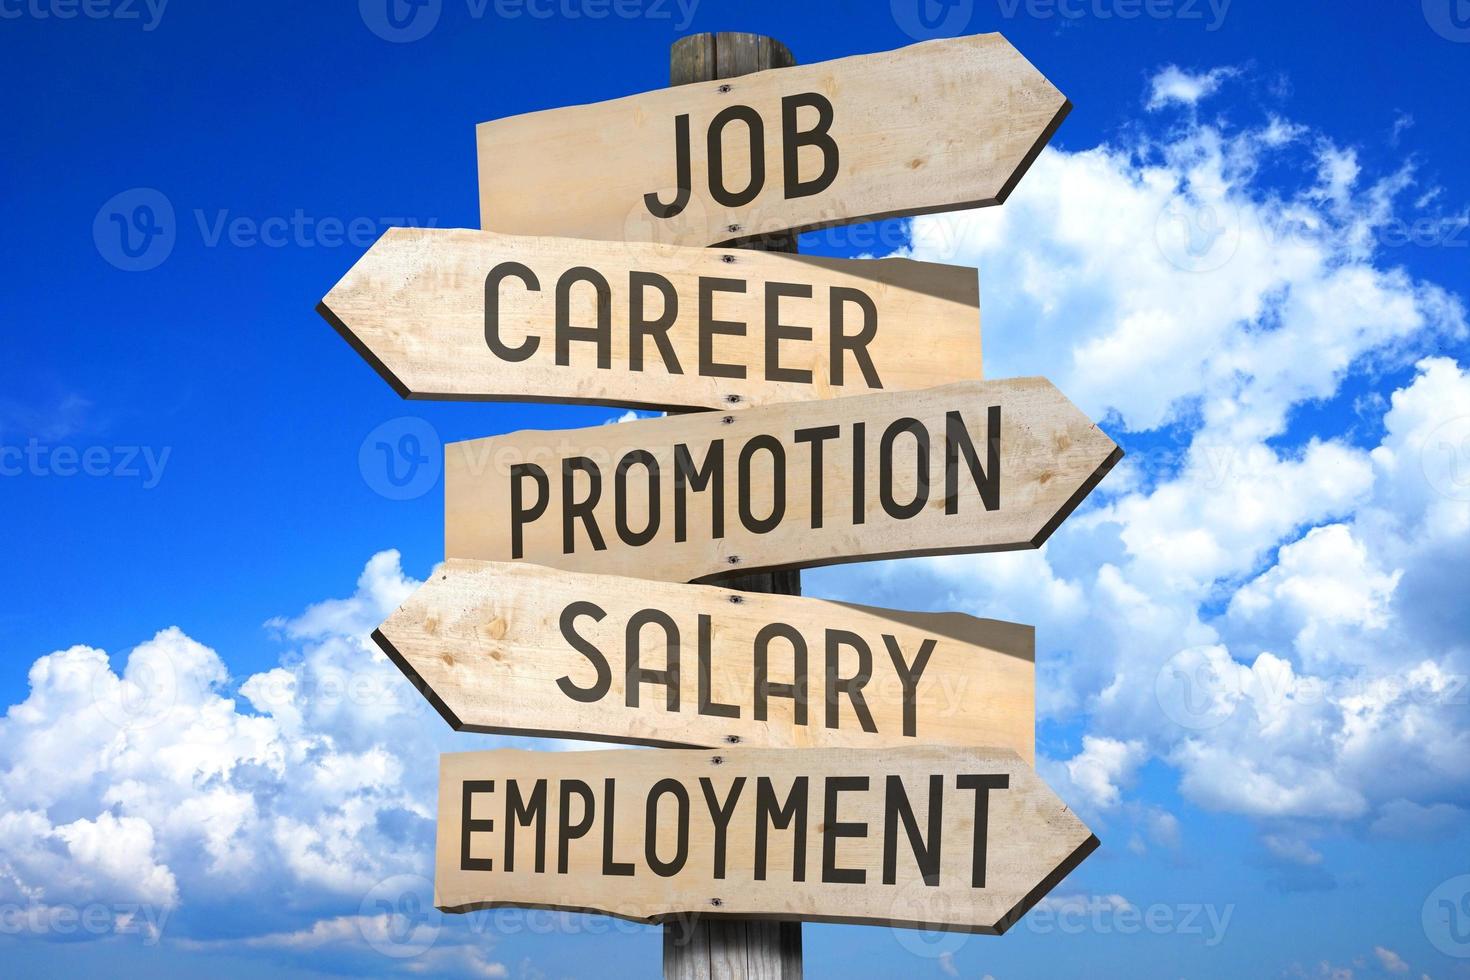 Job, Career, Promotion, Salary, Employment - Wooden Signpost with Five Arrows photo